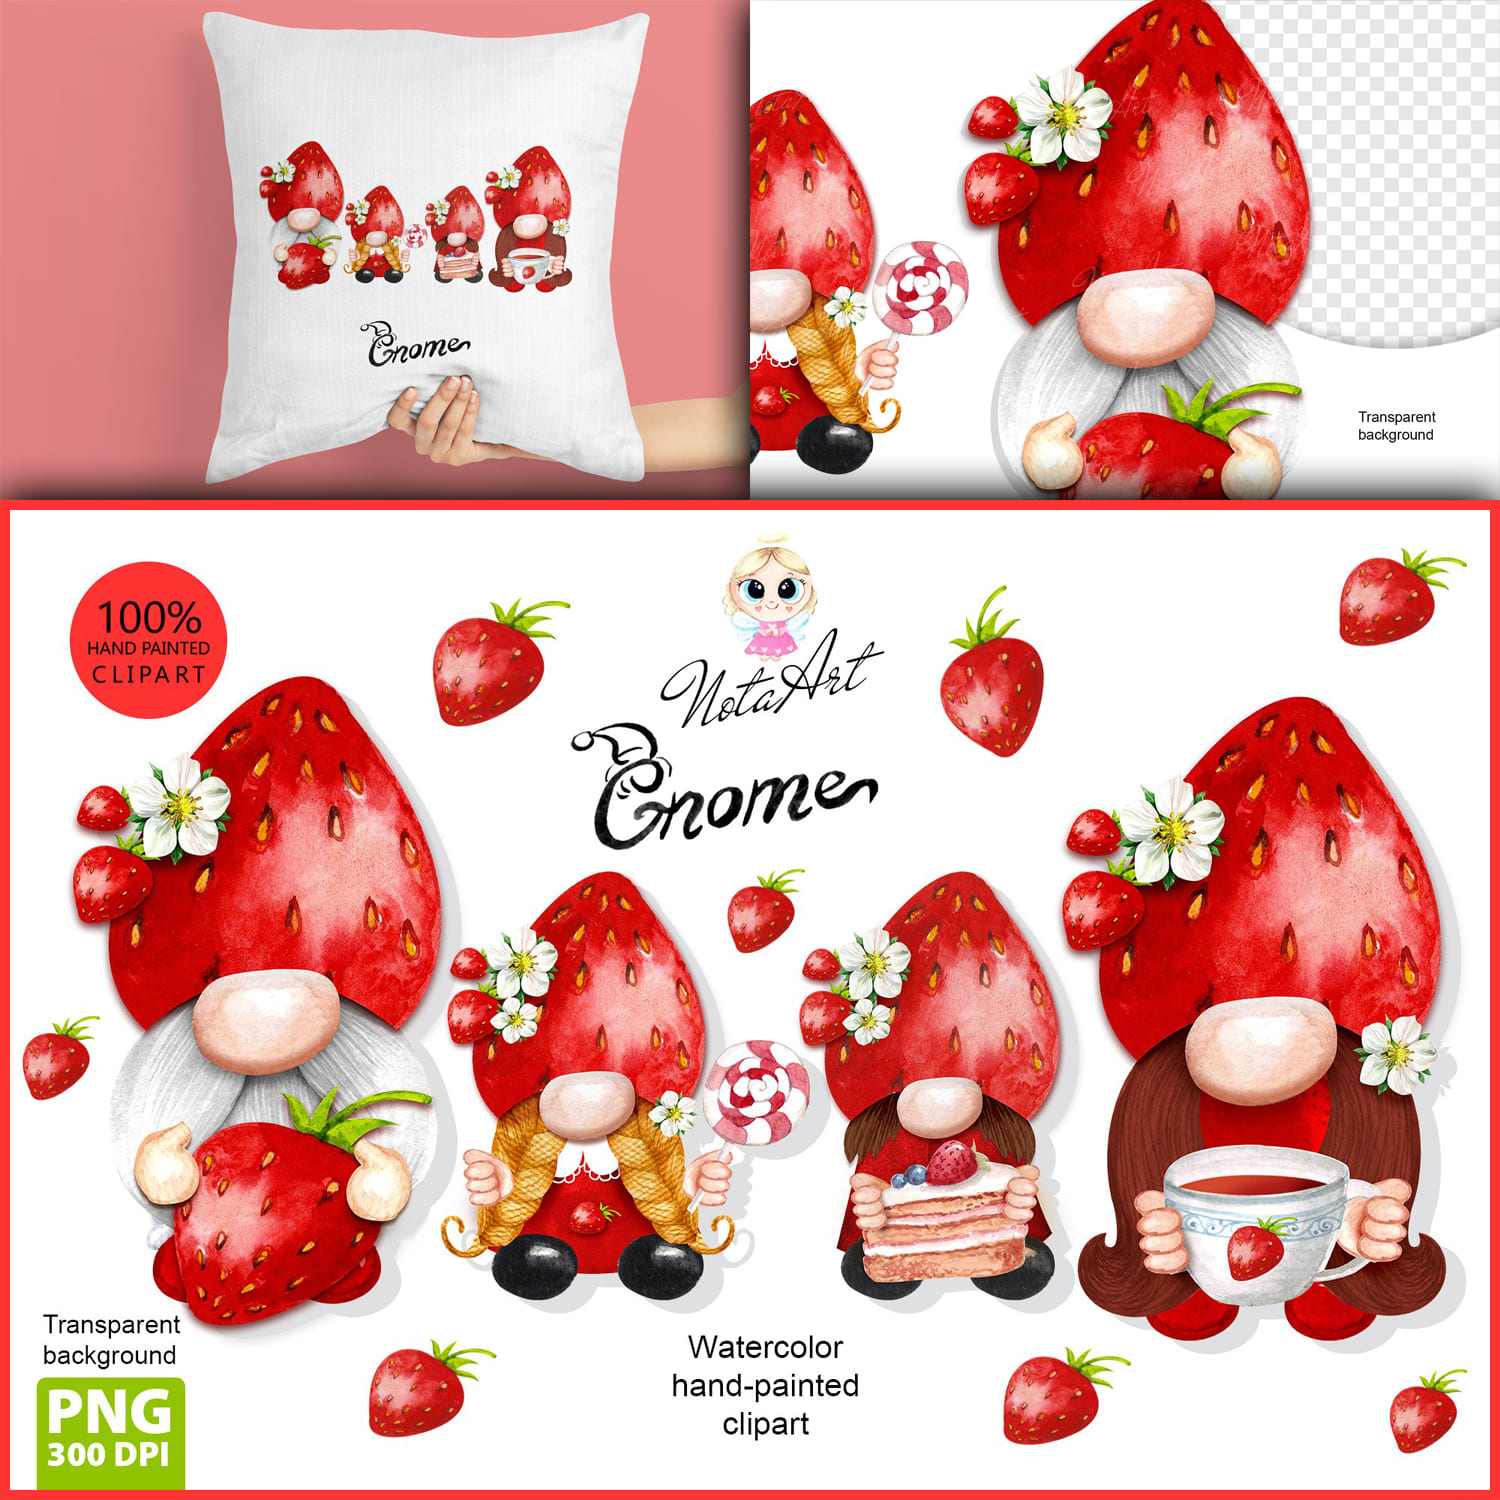 Examples of using the image of a family of gnomes decorated with strawberries in everyday things.